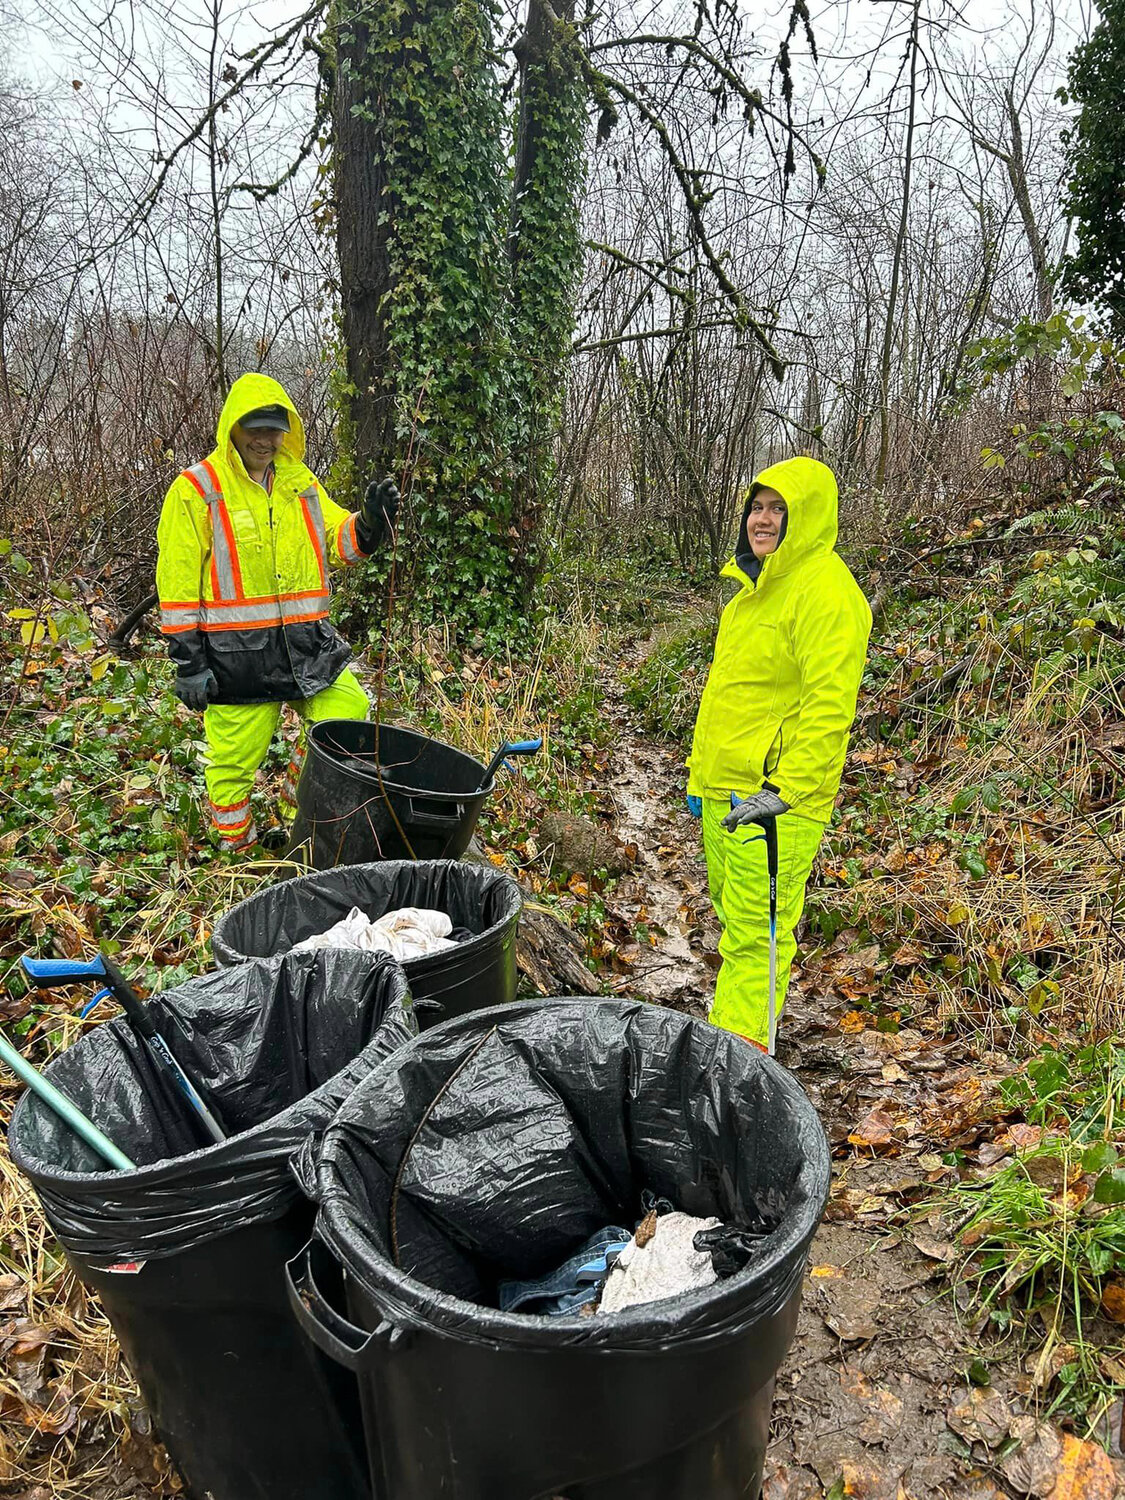 Centralia Clean Team volunteers are seen while cleaning in the woods behind Centralia Goodwill on Dec. 5 in this picture provided by Clean Team volunteer Cindy Browne.